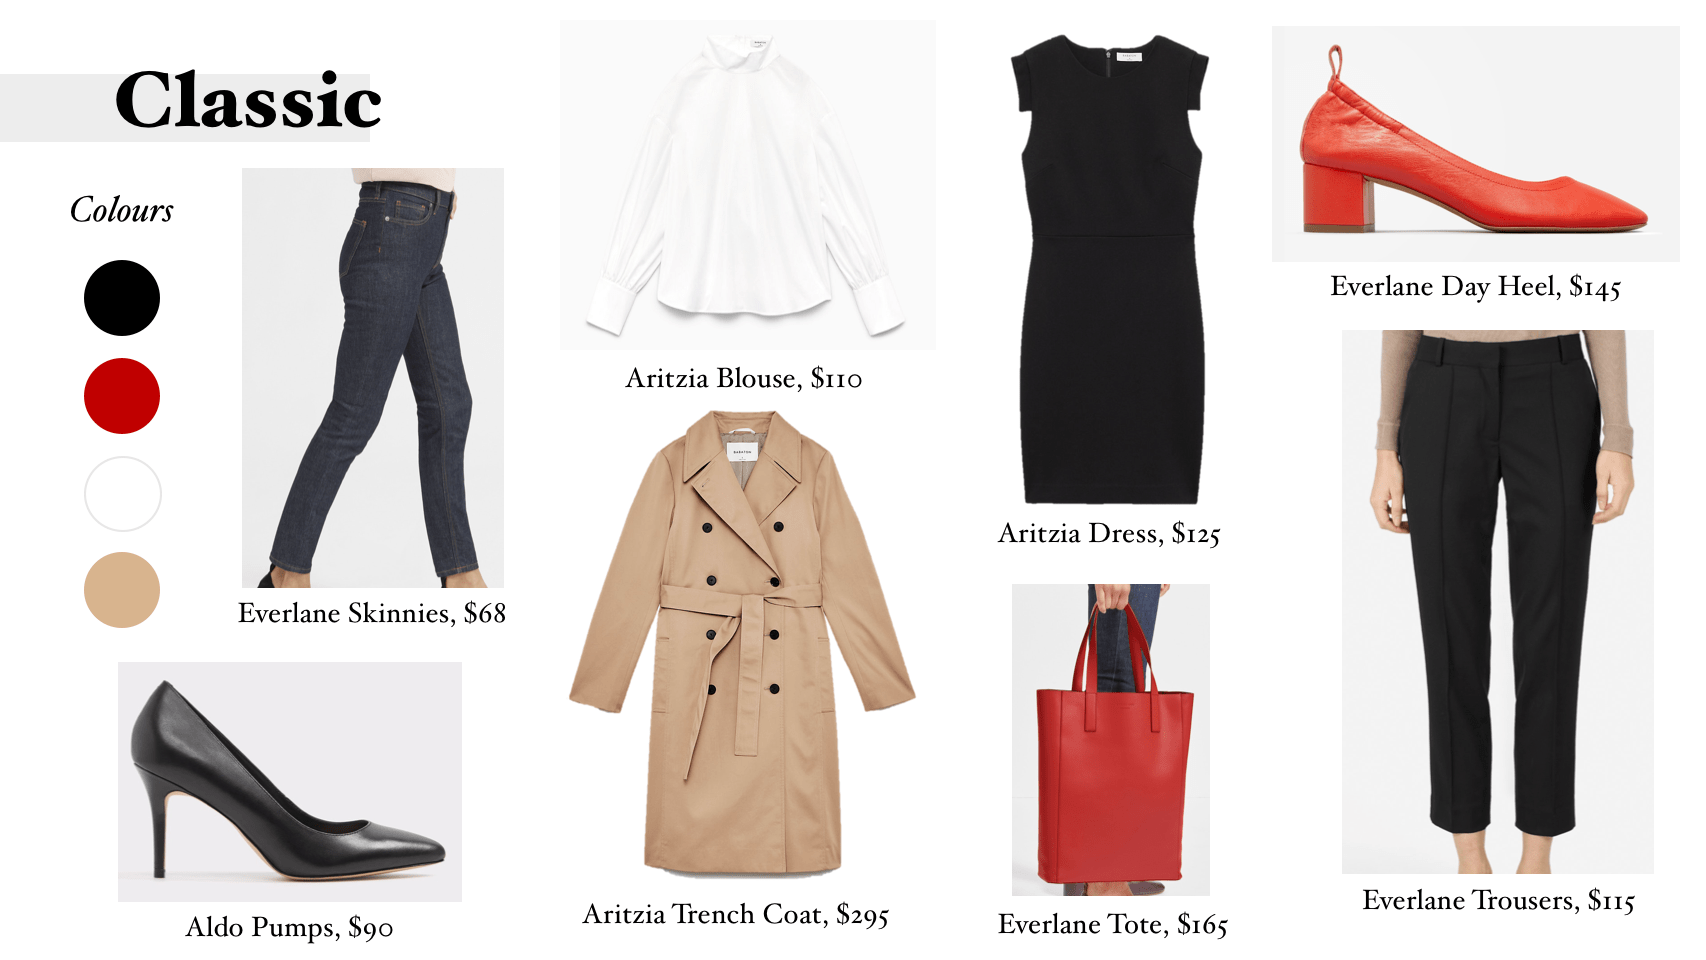 5 Mood Boards to Inspire Your Capsule Wardrobe